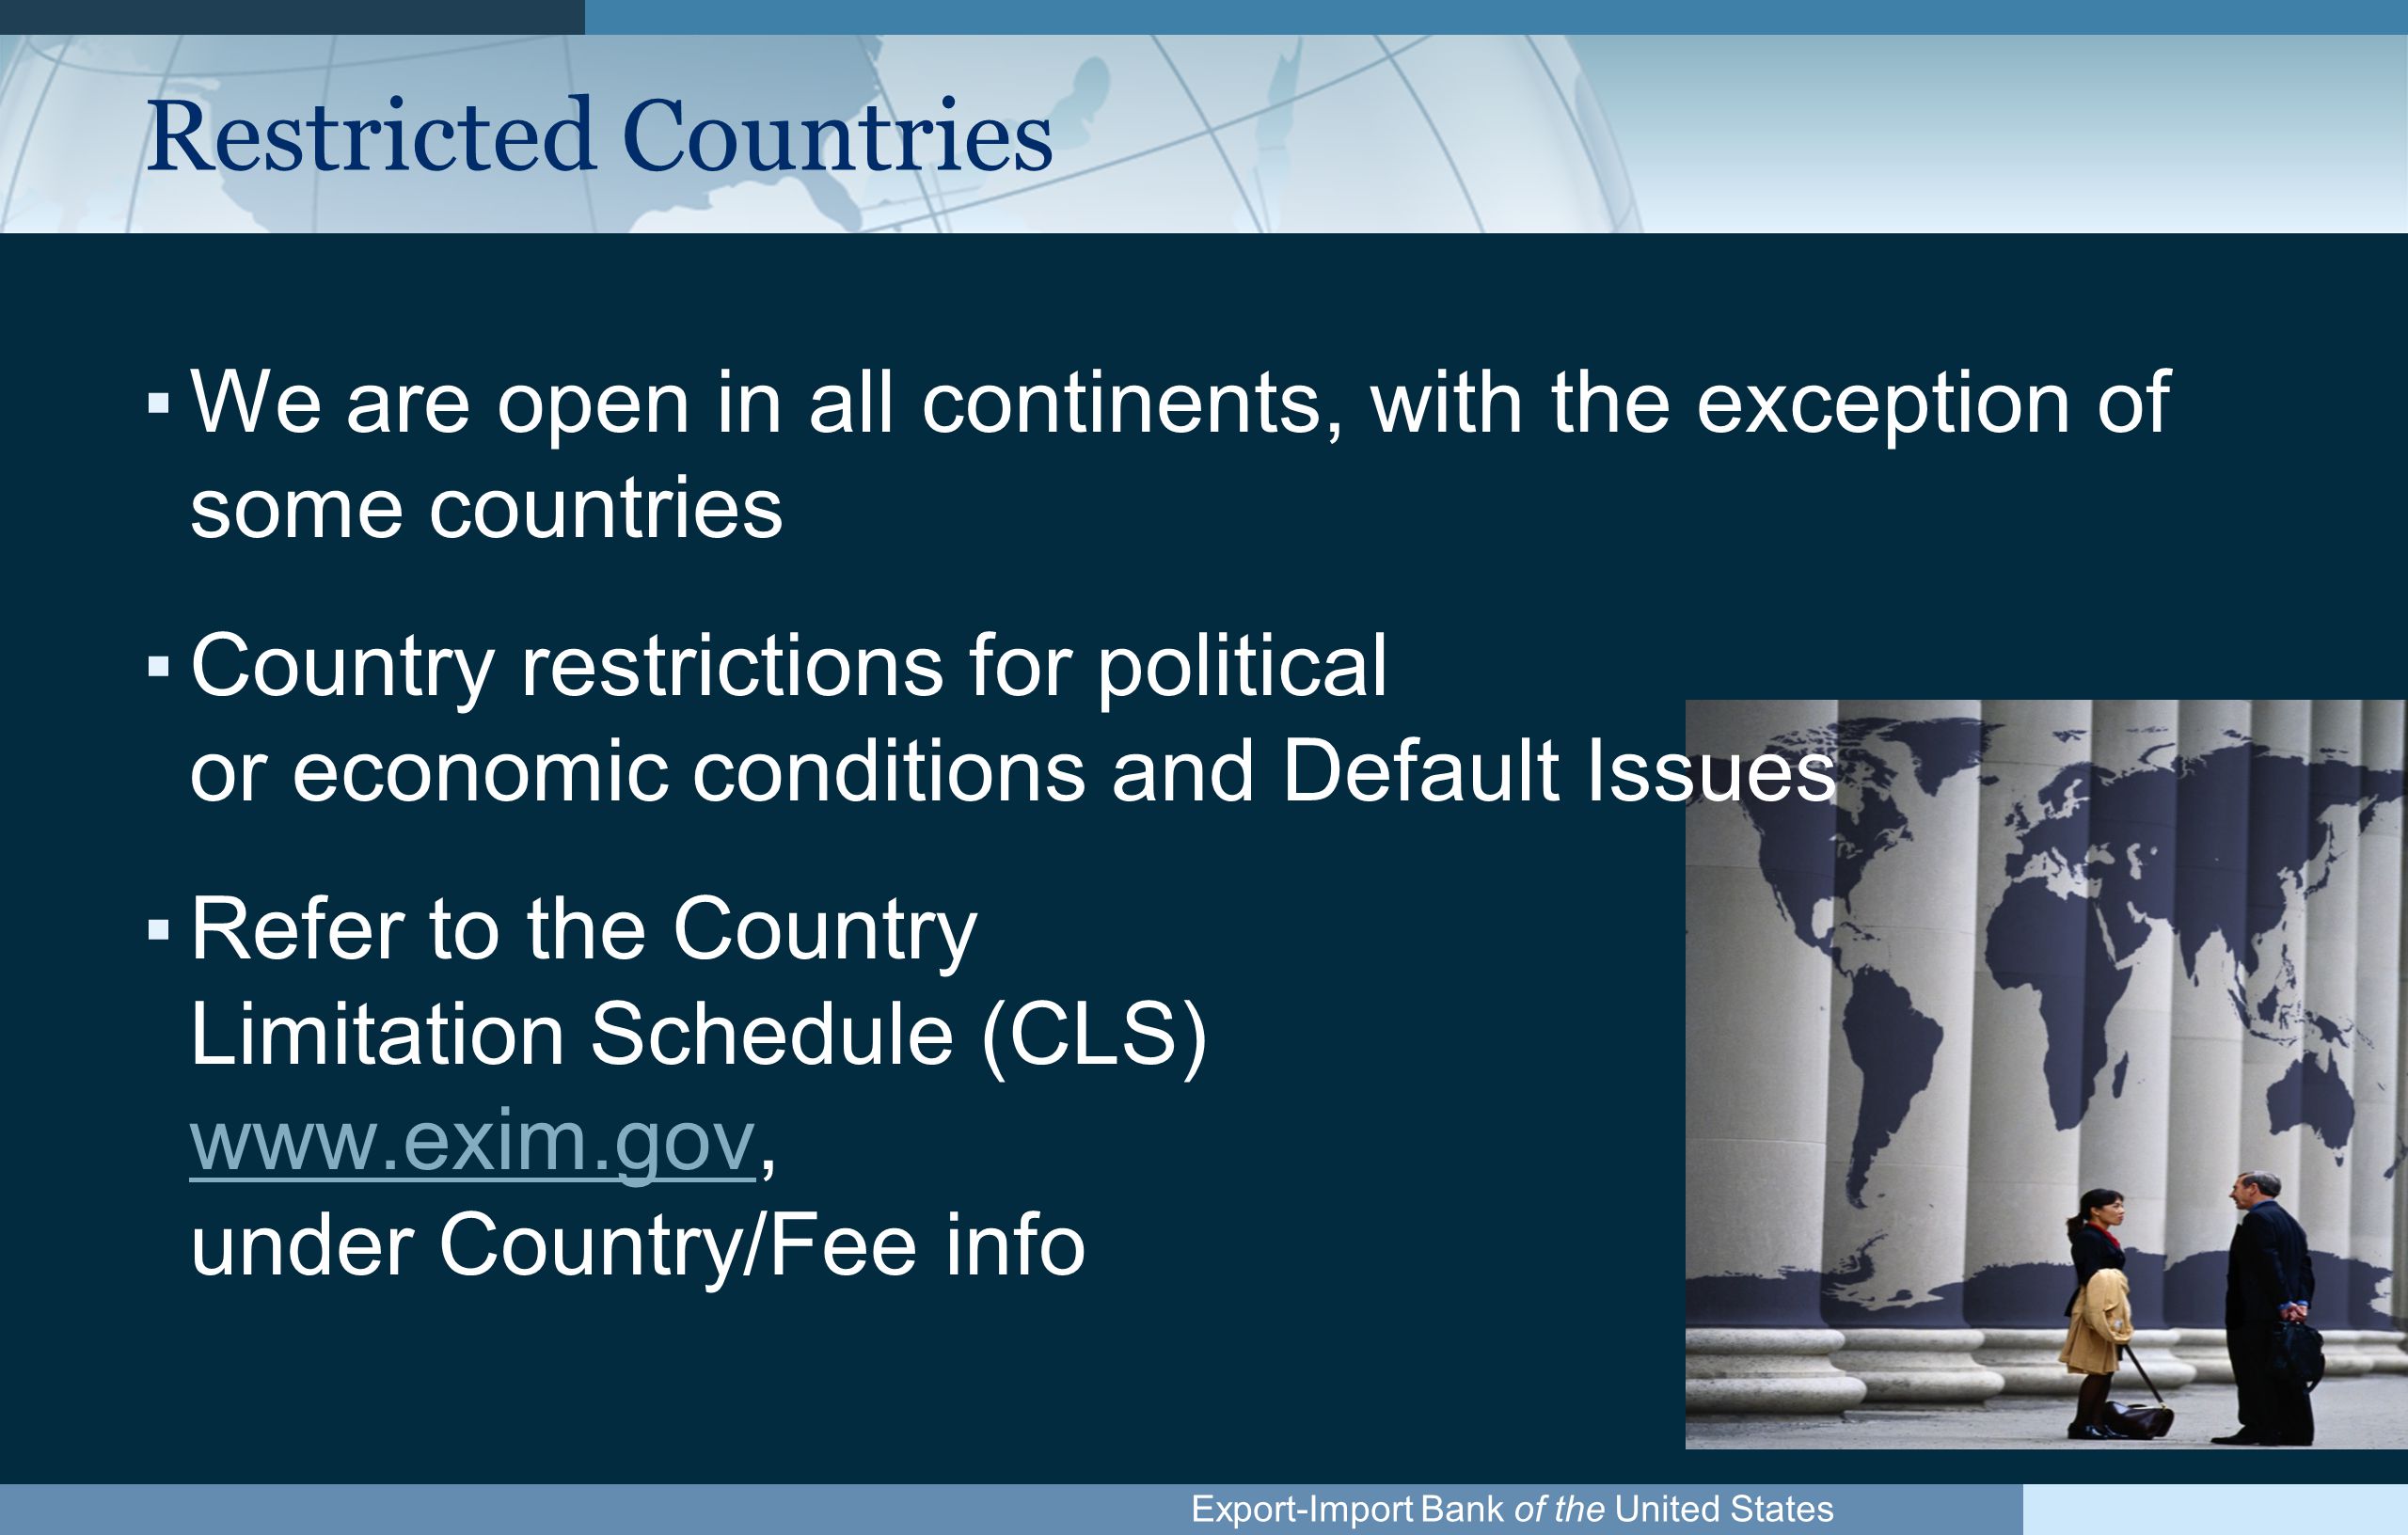 Export-Import Bank of the United States Restricted Countries ▪We are open in all continents, with the exception of some countries ▪Country restrictions for political or economic conditions and Default Issues ▪Refer to the Country Limitation Schedule (CLS)   under Country/Fee info